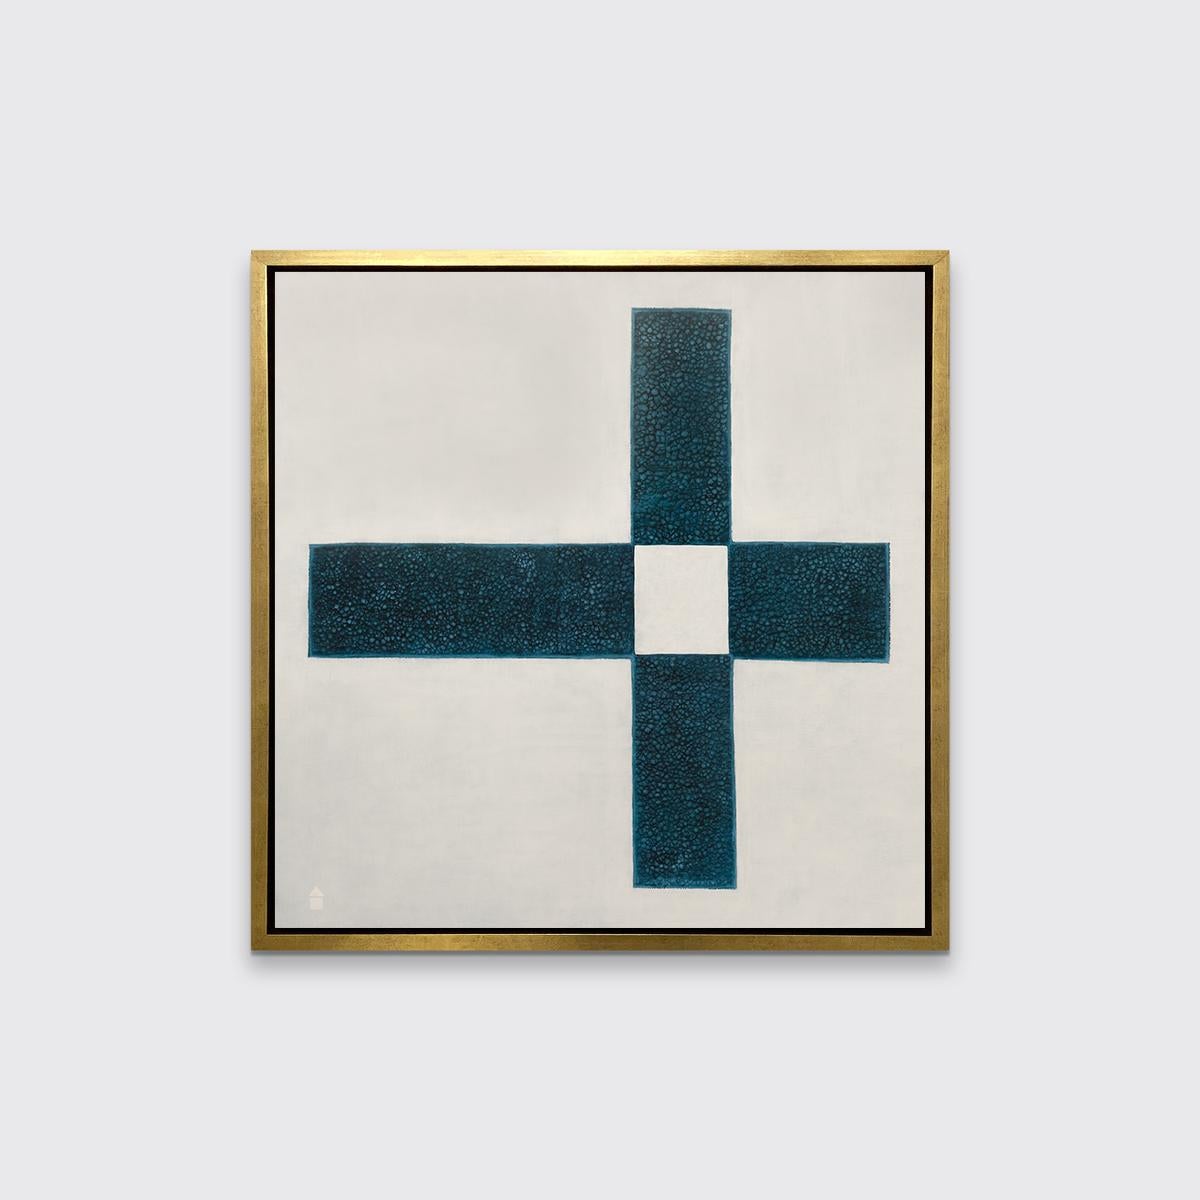 This abstract limited edition print by Sofie Swann features an off-white background, with textured geometric dark blue rectangles arranged around a white square, pointing out vertically and horizontally on each side. 

This print is an edition size